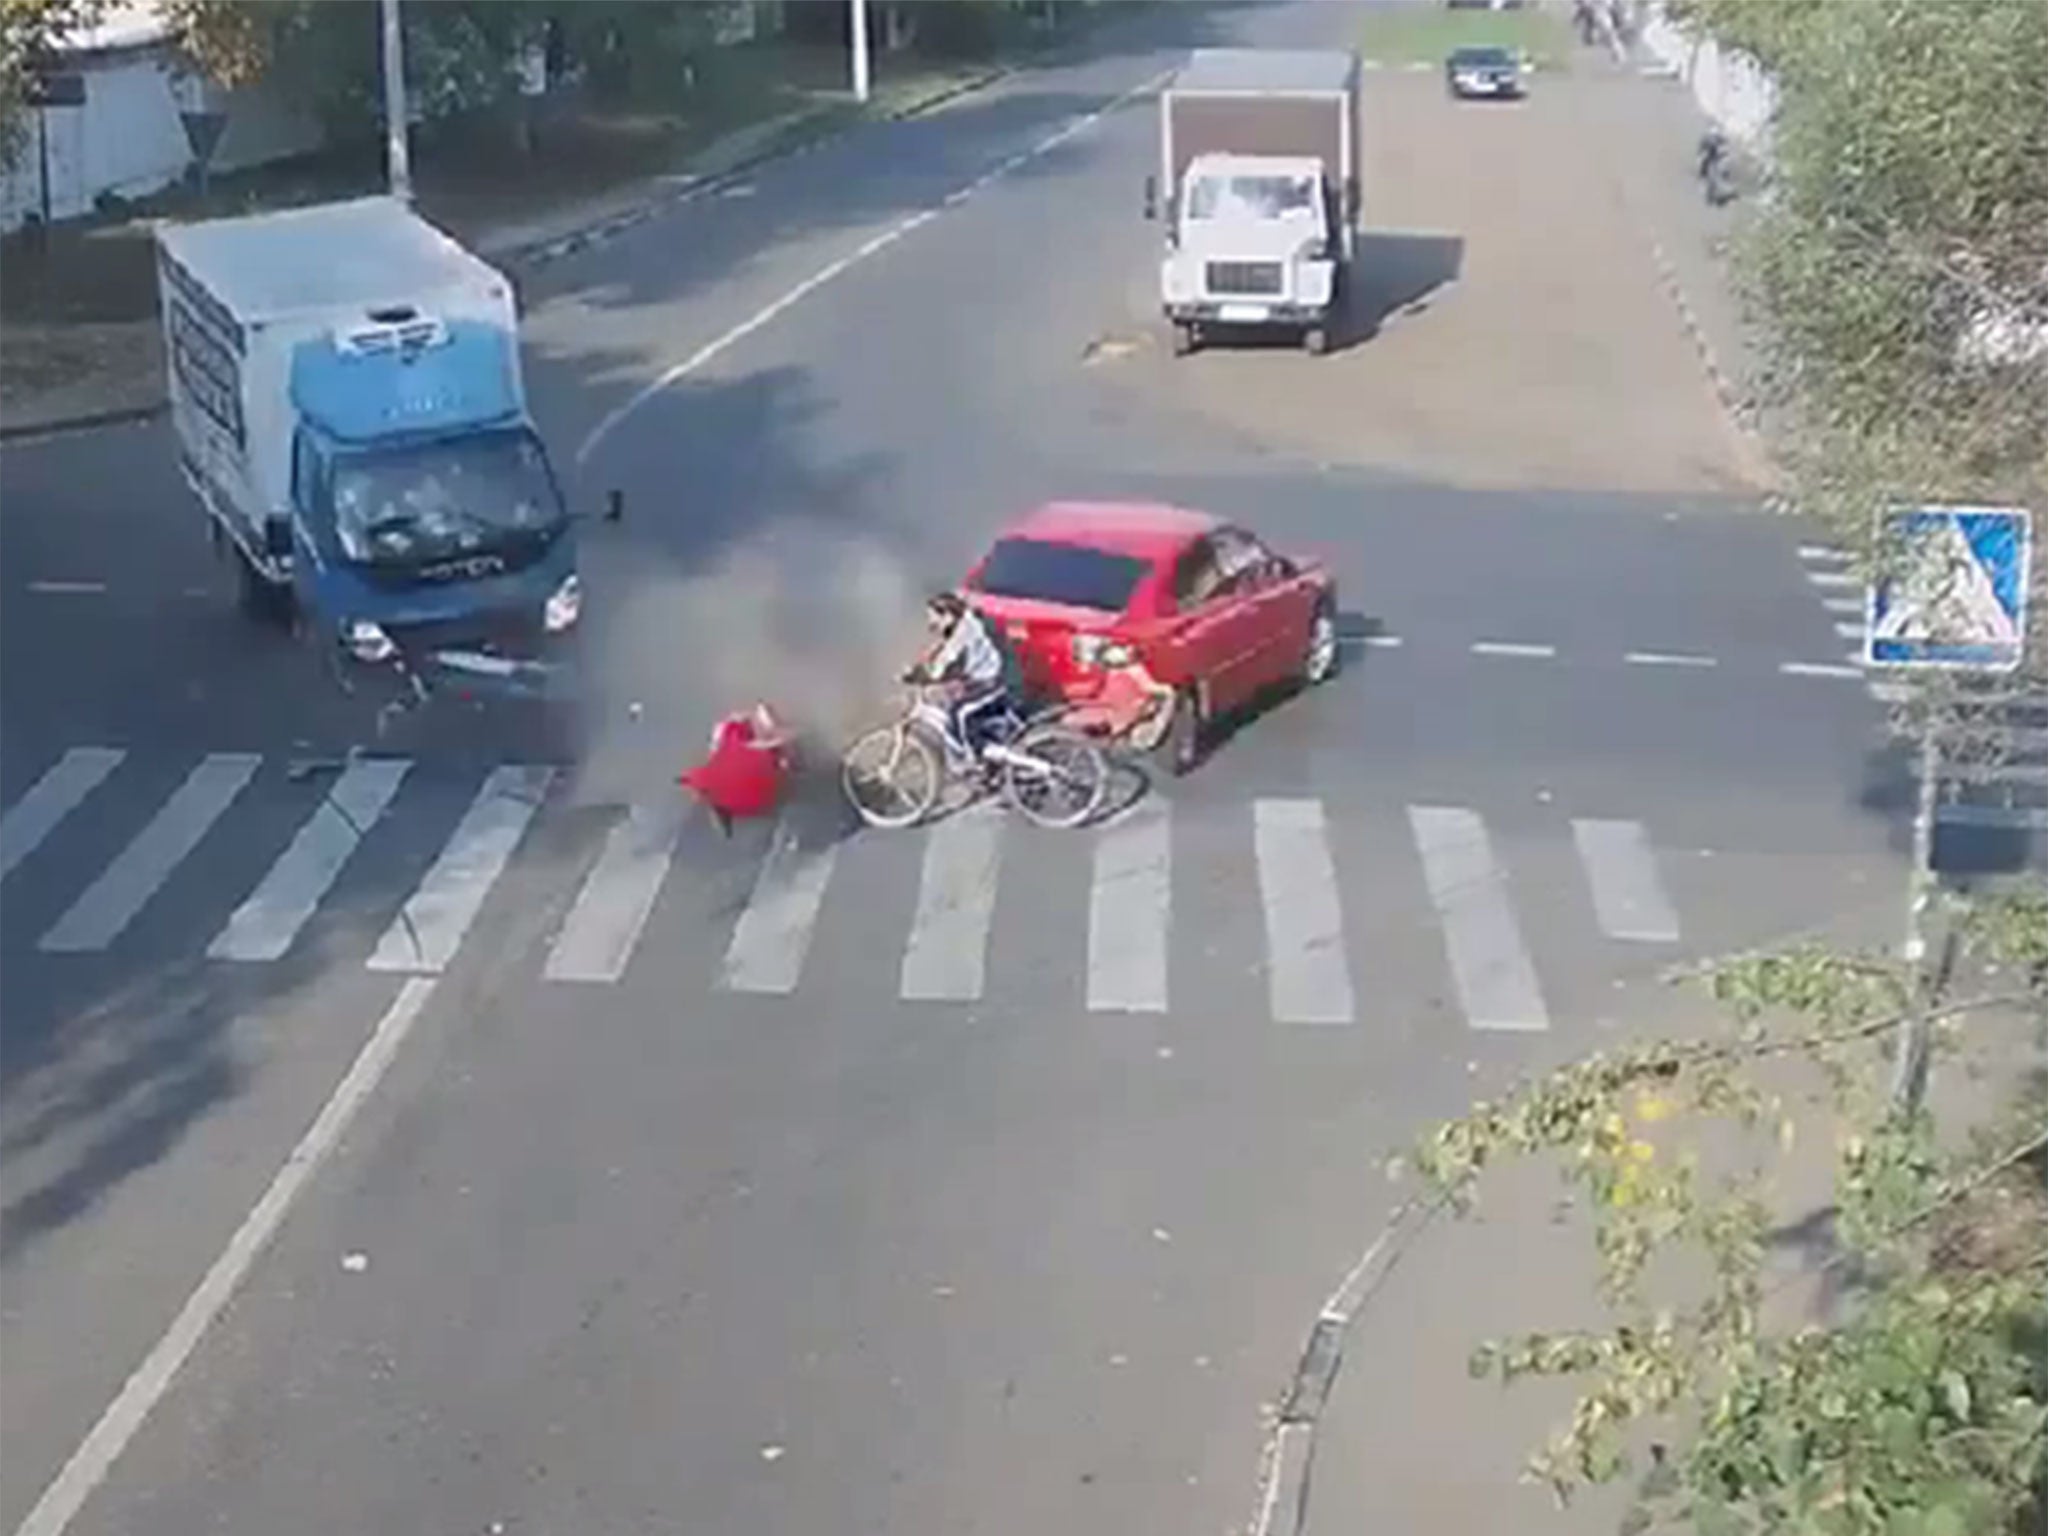 A still from a video showing a cyclist narrowly missing being hit by a car and a lorry.